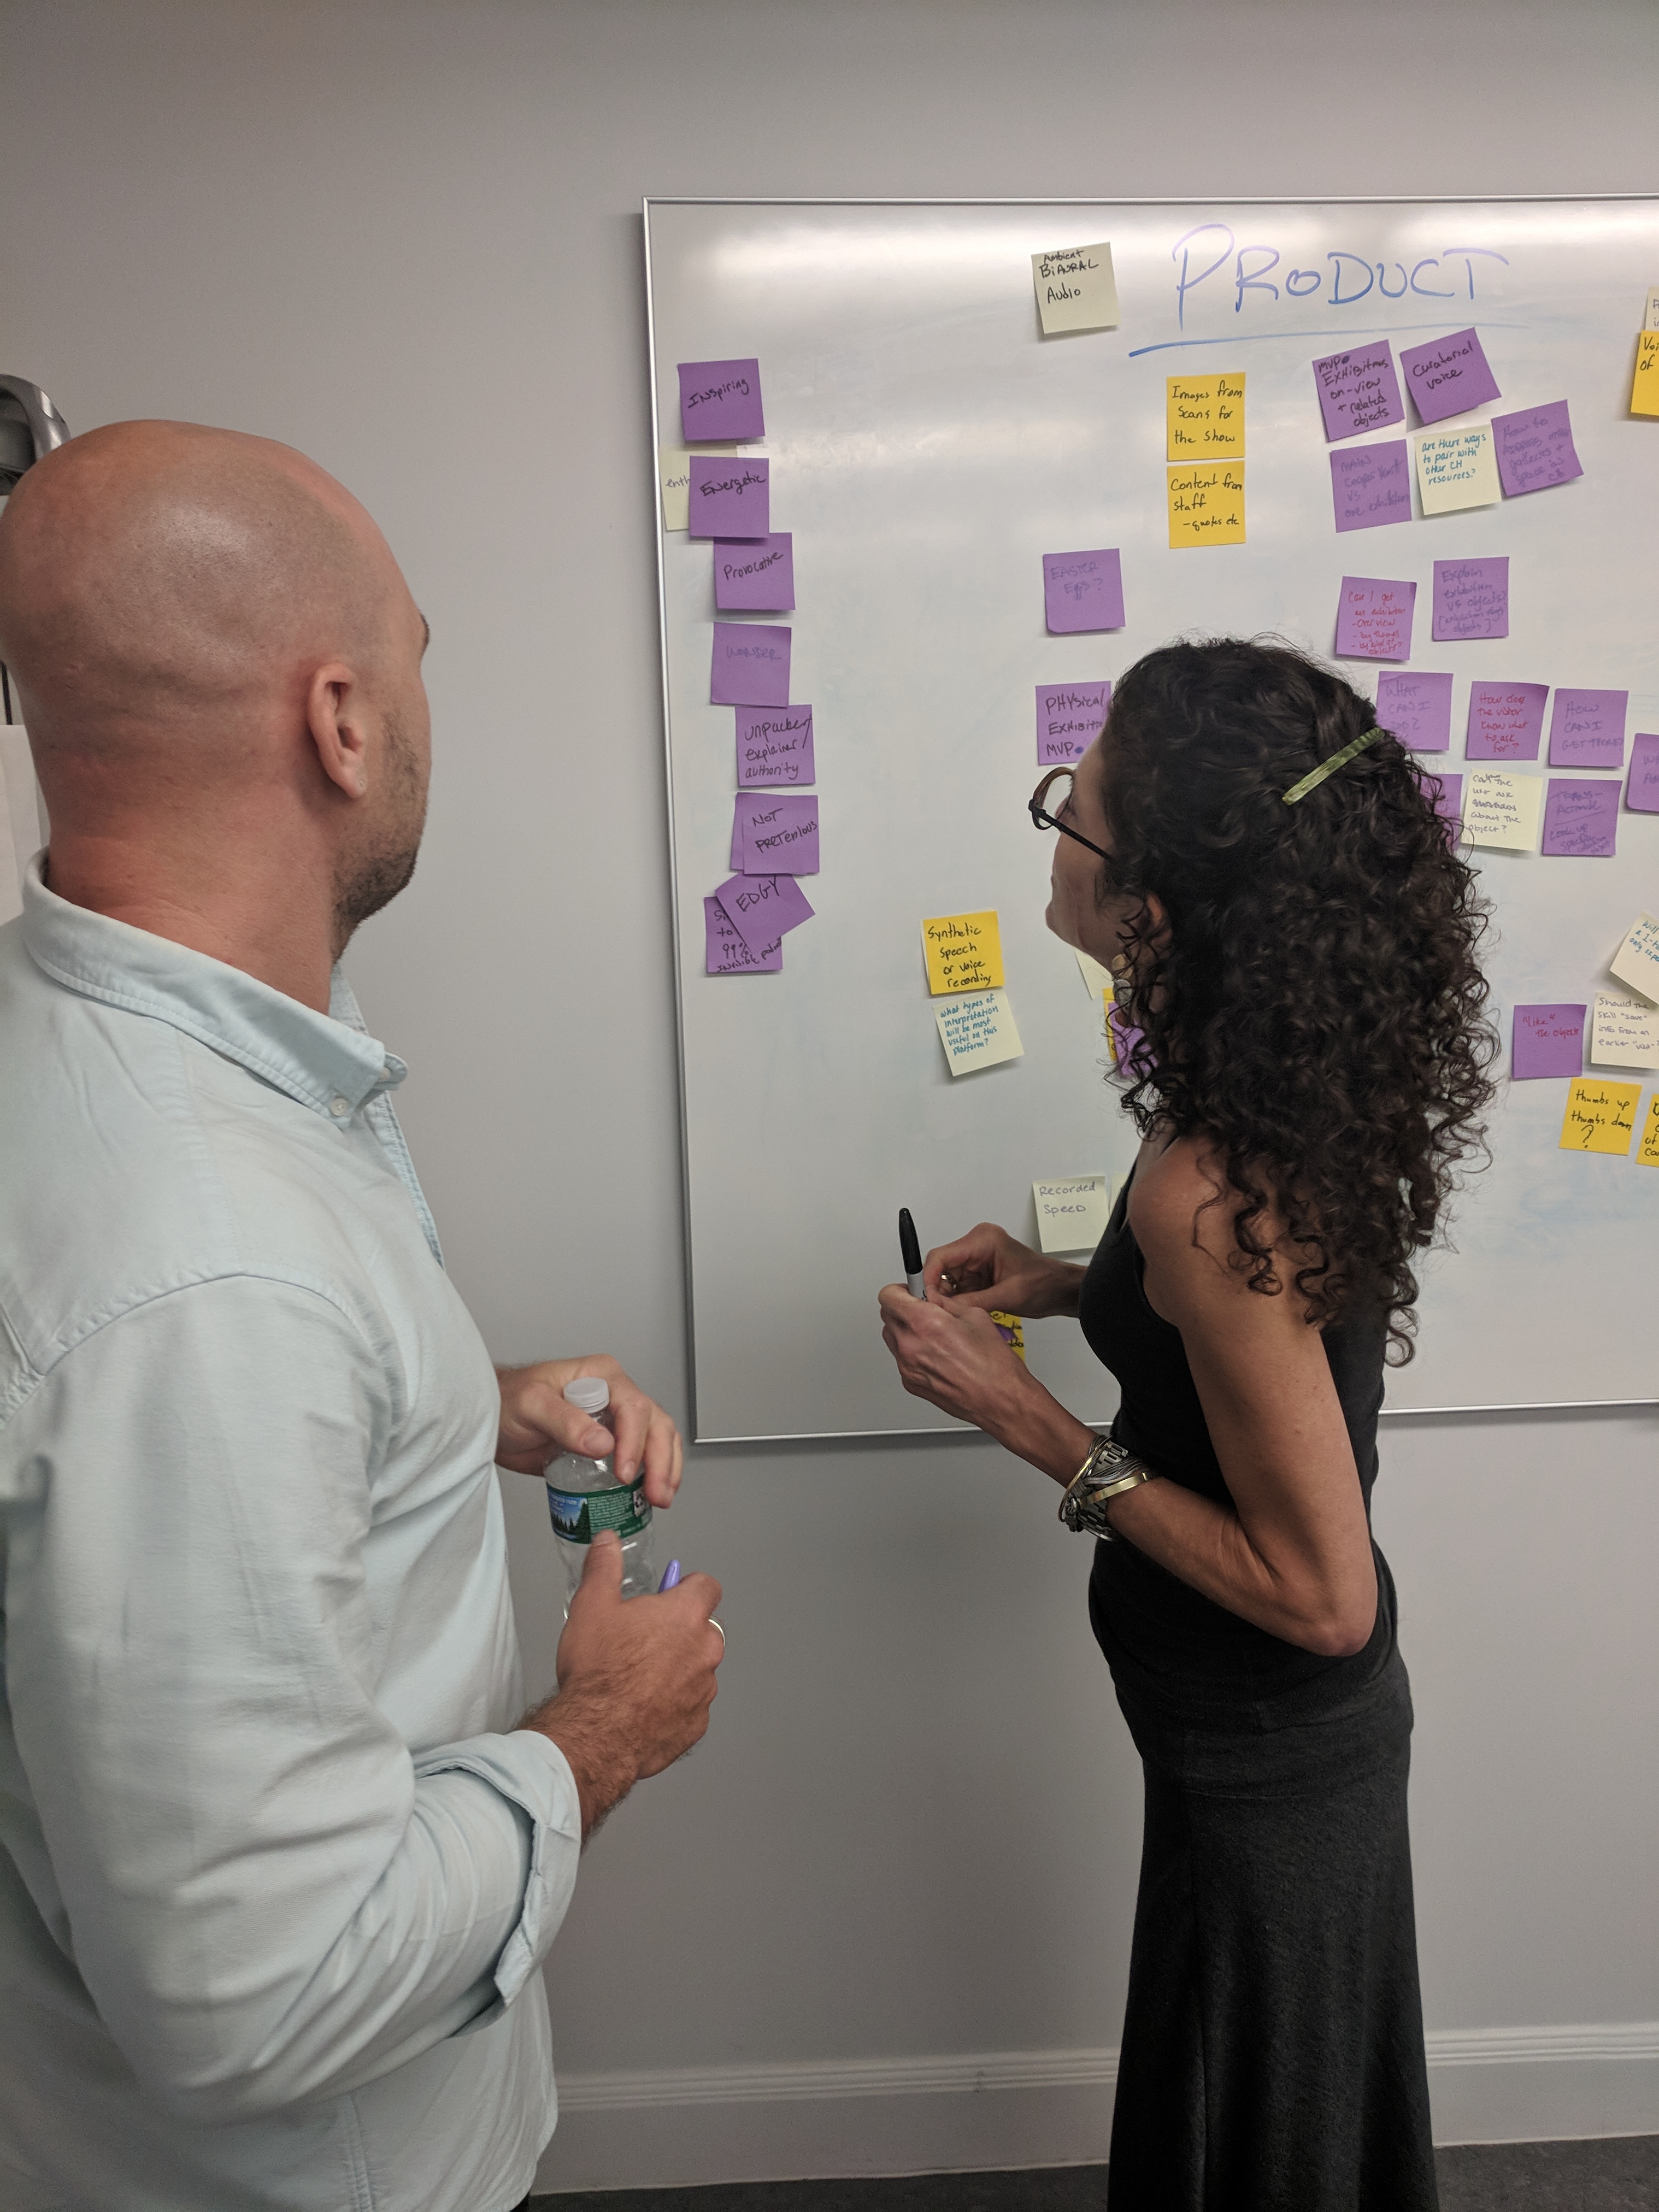 Two people standing at a white board looking at a string of purple post its